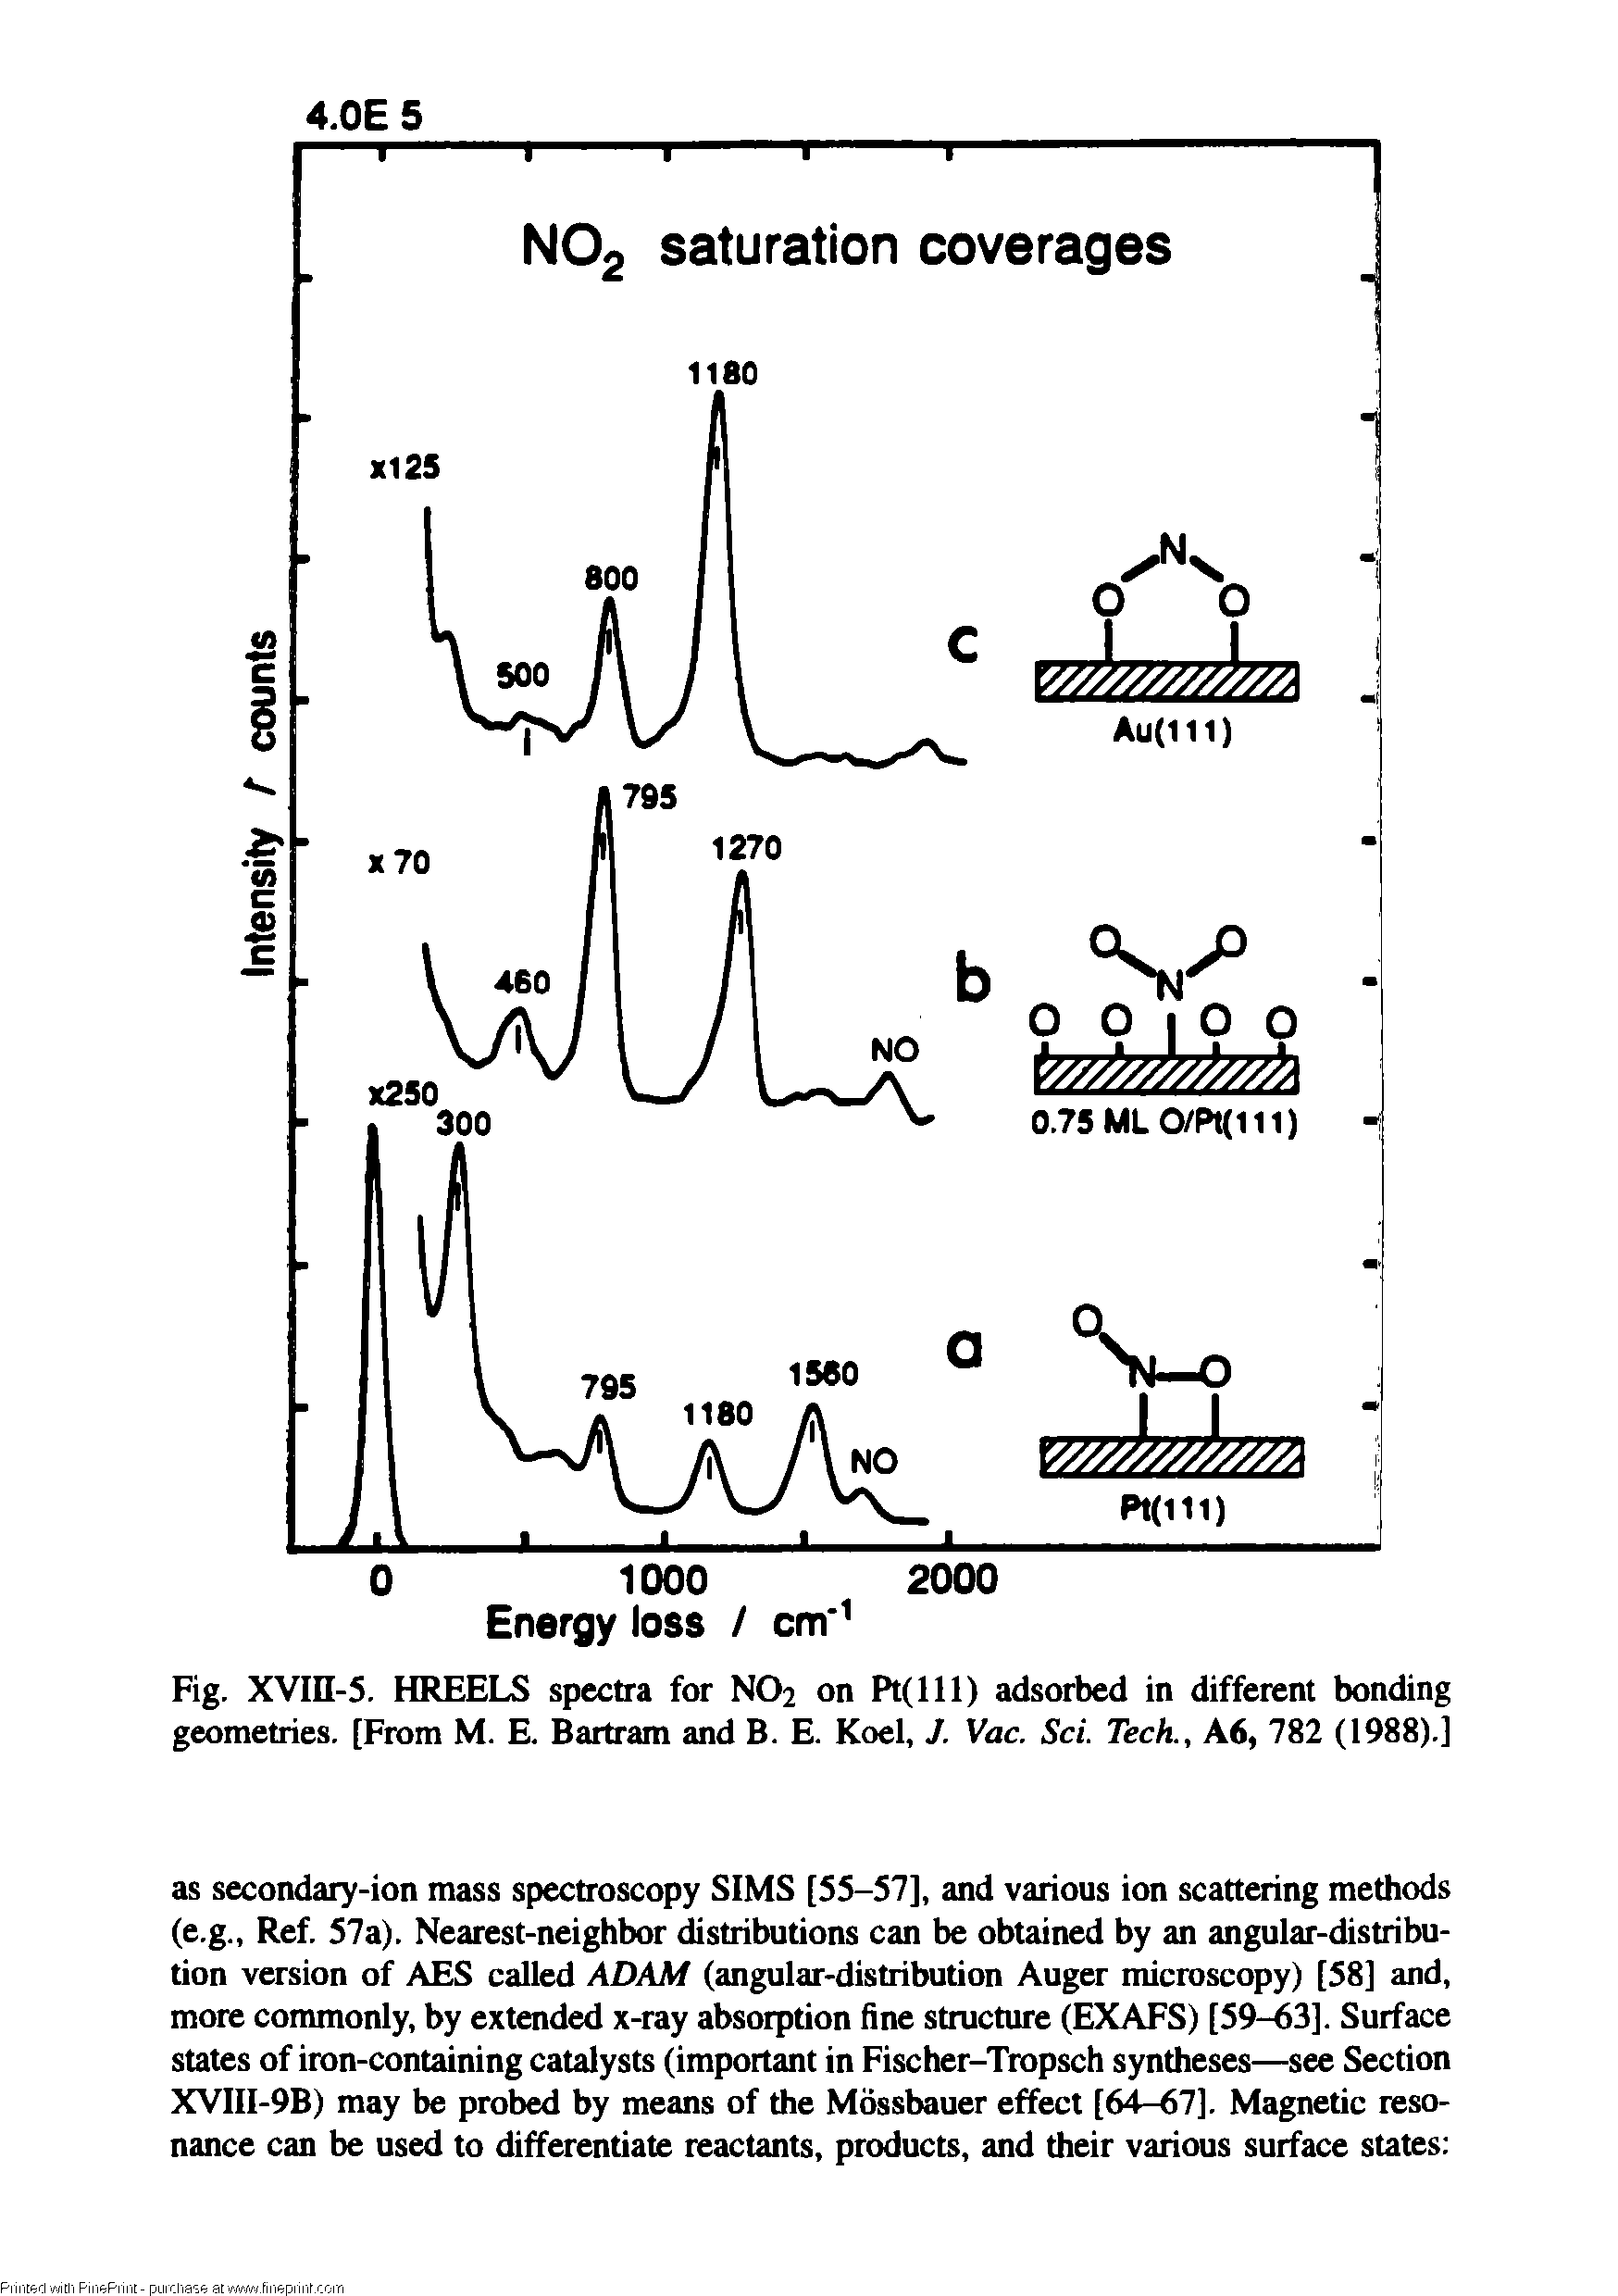 Fig. XVin-5. HREELS spectra for NO2 on Pt(lll) adsorbed in different bonding geometries. [From M. E. Bartram and B. E. Koel, / Vac. Sci. Tech., A6, 782 (1988).]...